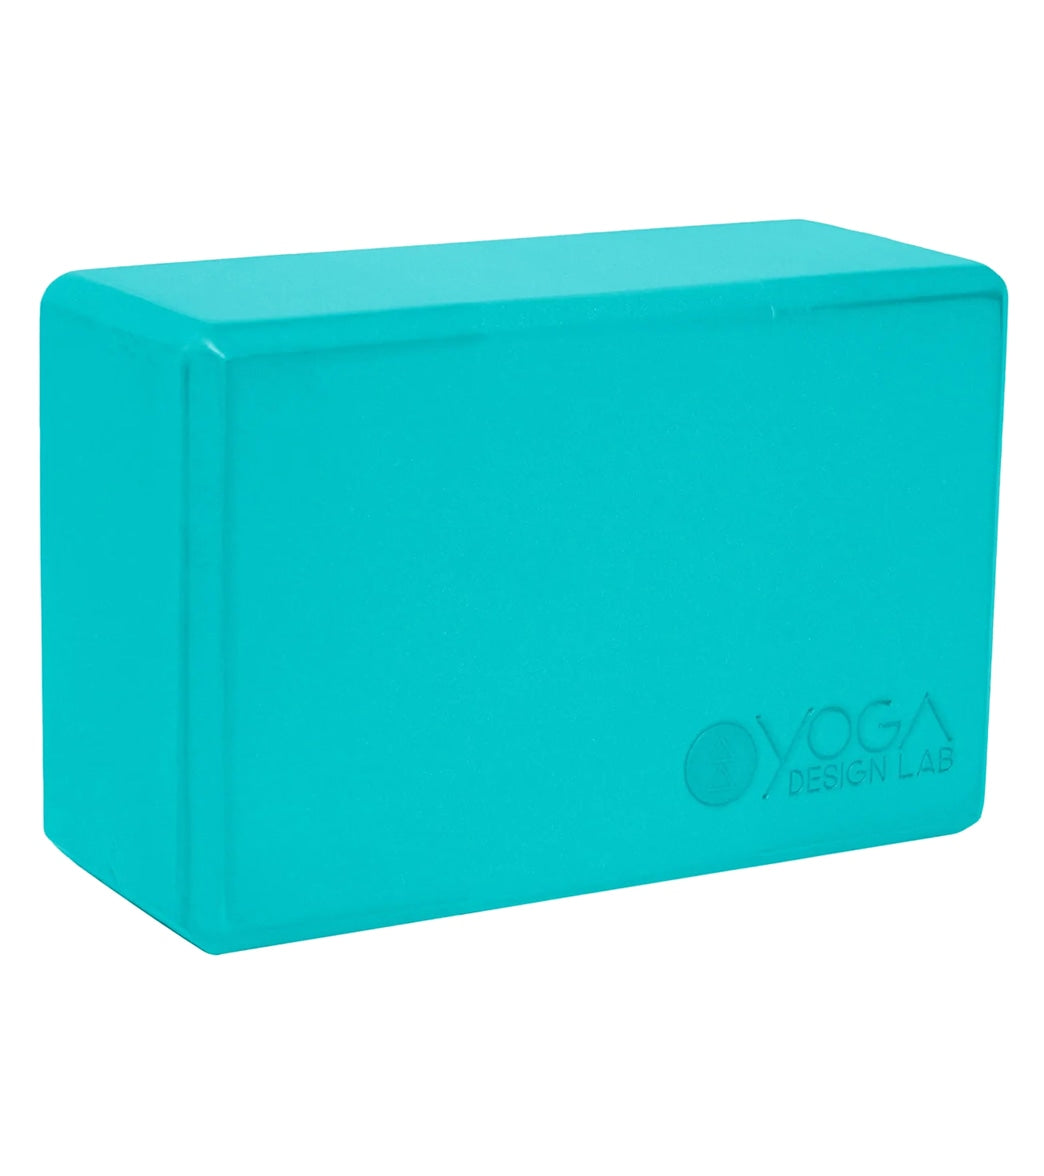 Foam Yoga Block - Aqua Sky - To provide more support for your yoga practices